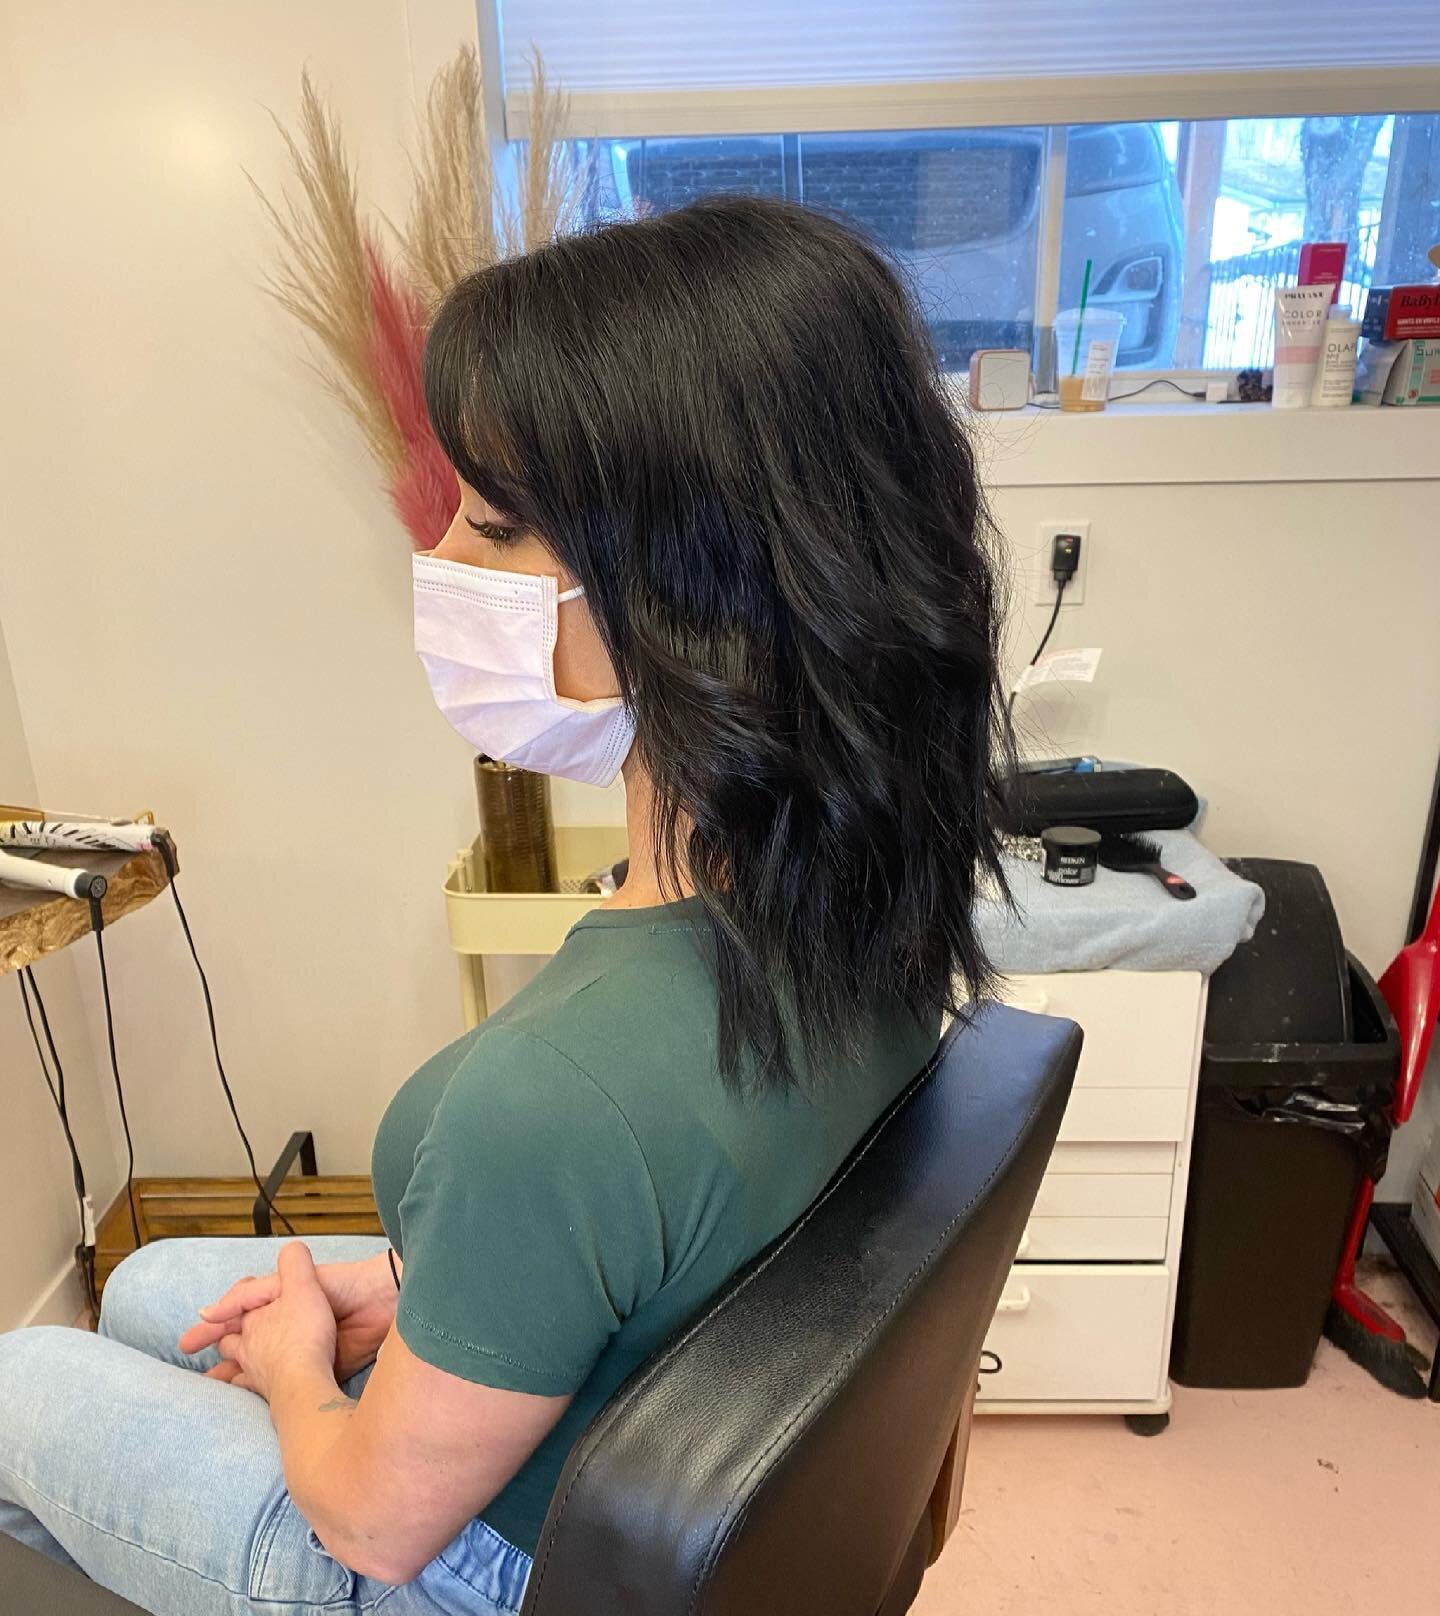 Fresh colour &amp; cut for my girl Ruby 💜 
.
Need a spray tan?! Give her some love @theglow.studio 👌🏼
.
.
.
#redkenobsessed #haircolour #haircolorist #princegeorgehairstylist #princegeorgebc #supportpg #hairstyles #hairtrends #shinyhair #darkhair 